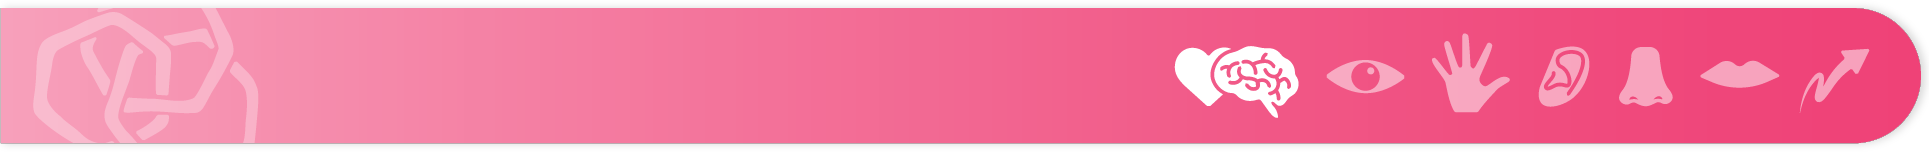 Section banner indicating the start of a new section. On the right, 7 icons depict the senses: a heart and brain, an eye, a hand, an ear, a nost, a mouth, and an arrow (movement). Chapter 1 banner is pink with the heart and brain icon highlighted.